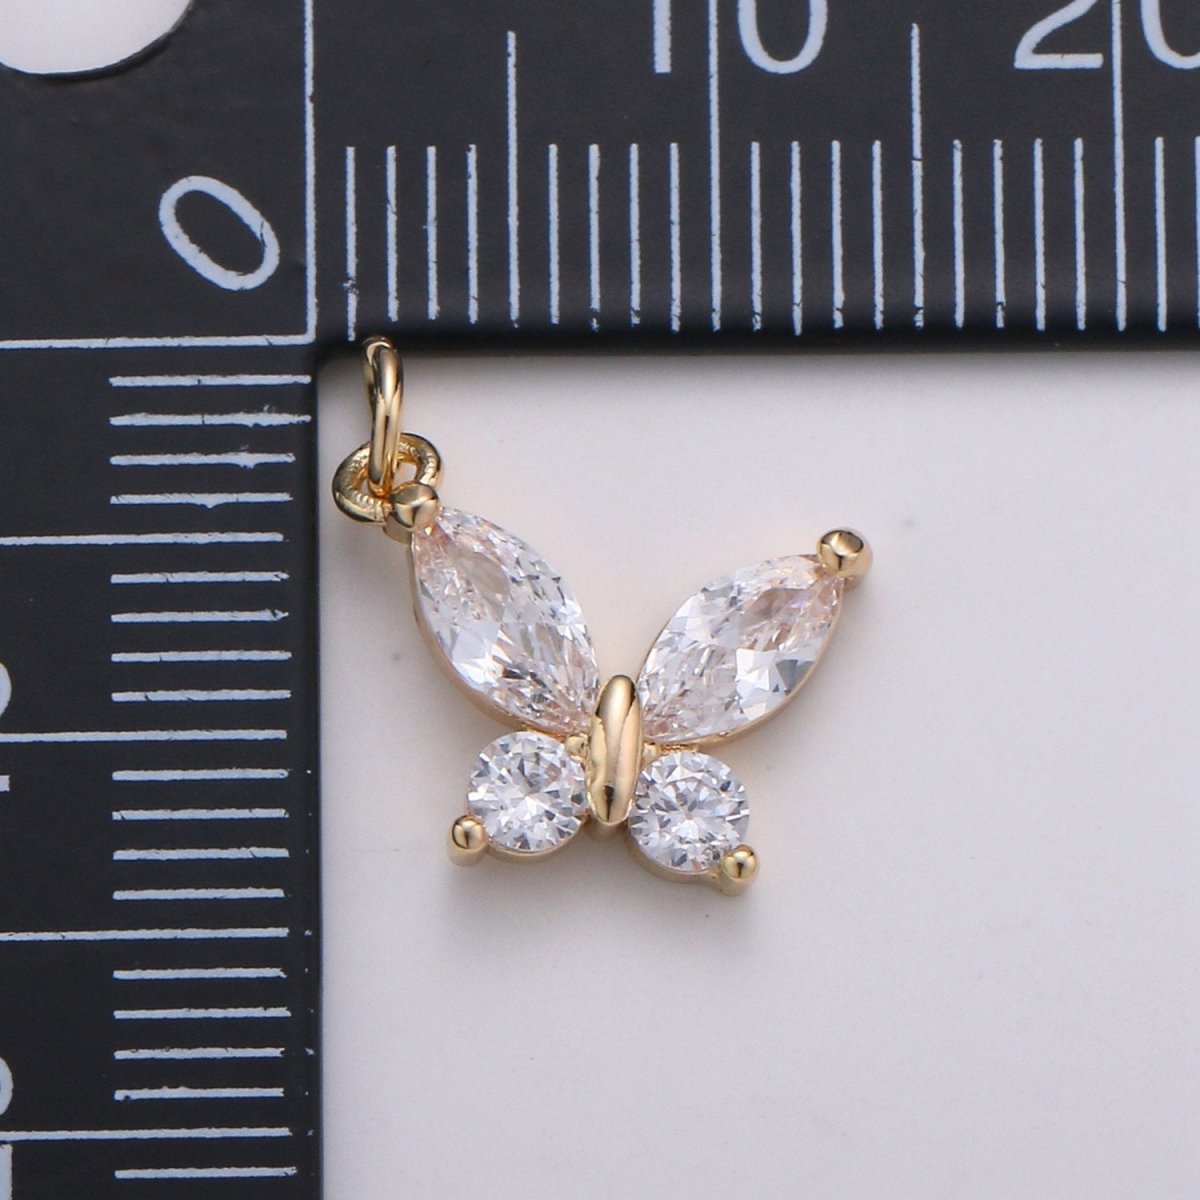 24k Gold Filled Pear Cut CZ Butterfly Charm, Cubic Zirconia Mariposa Pendant Charm, Dainty Gold Filled Charm, For DIY Jewelry D-384 D-775 - DLUXCA